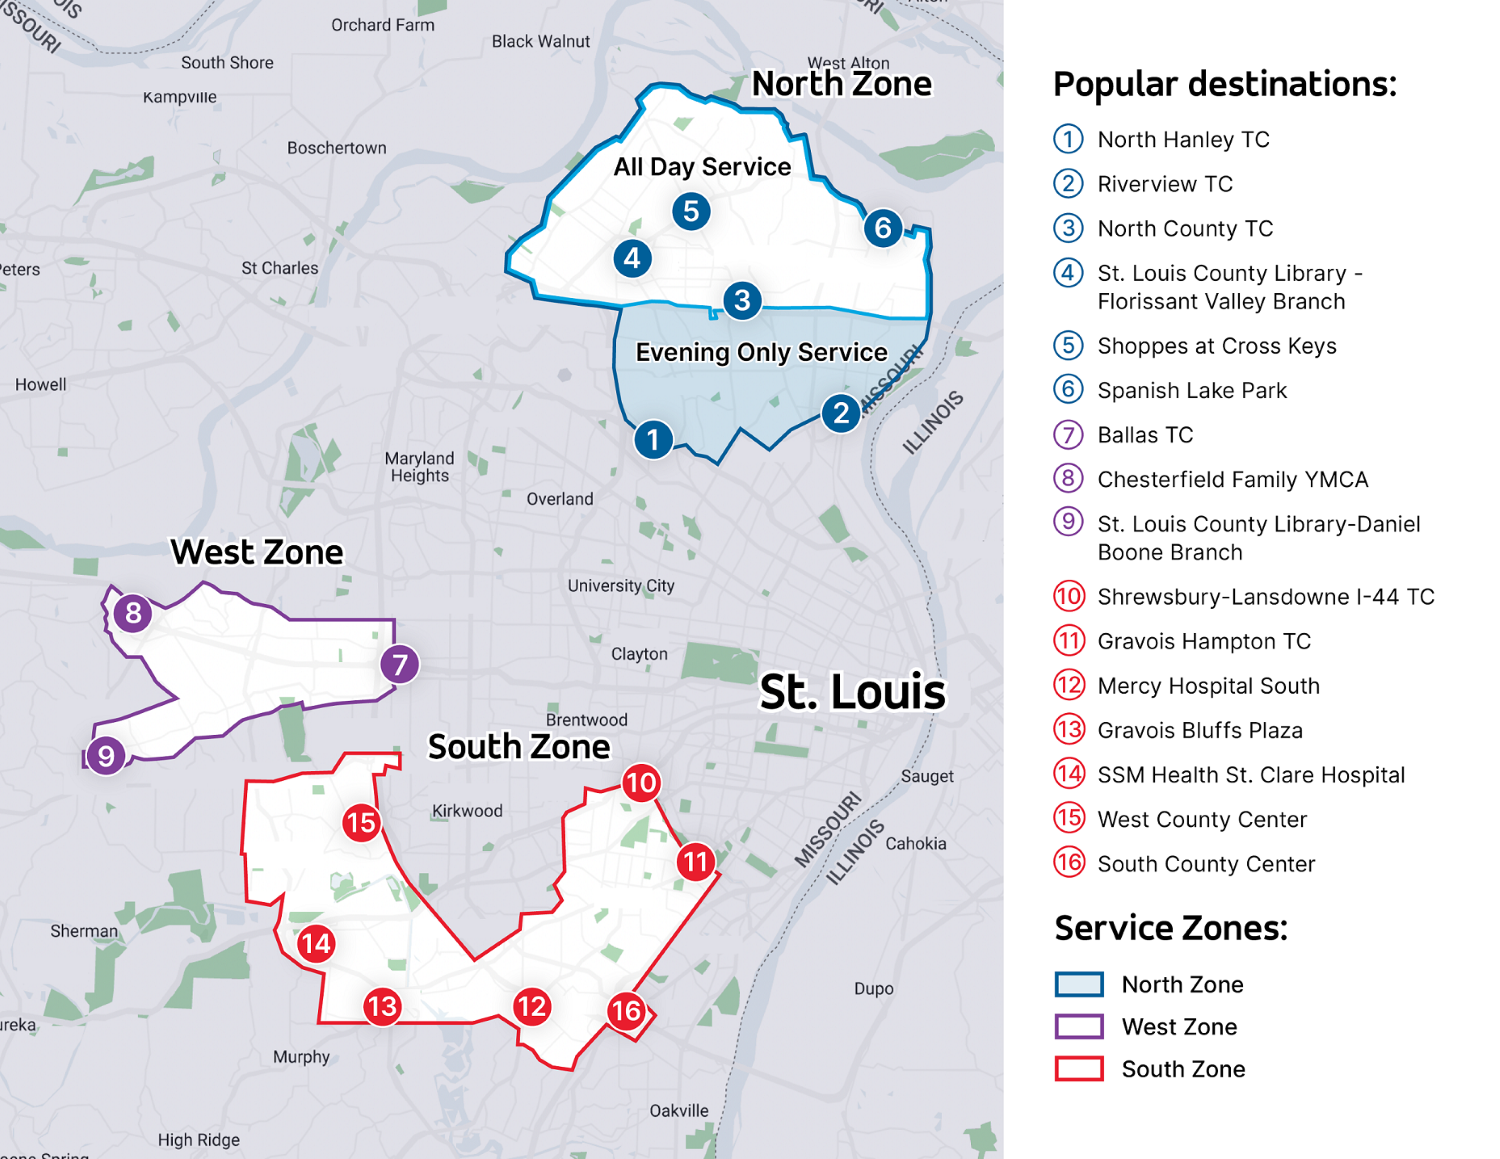 A map of the St. Louis area showing service zones for Via STL service.